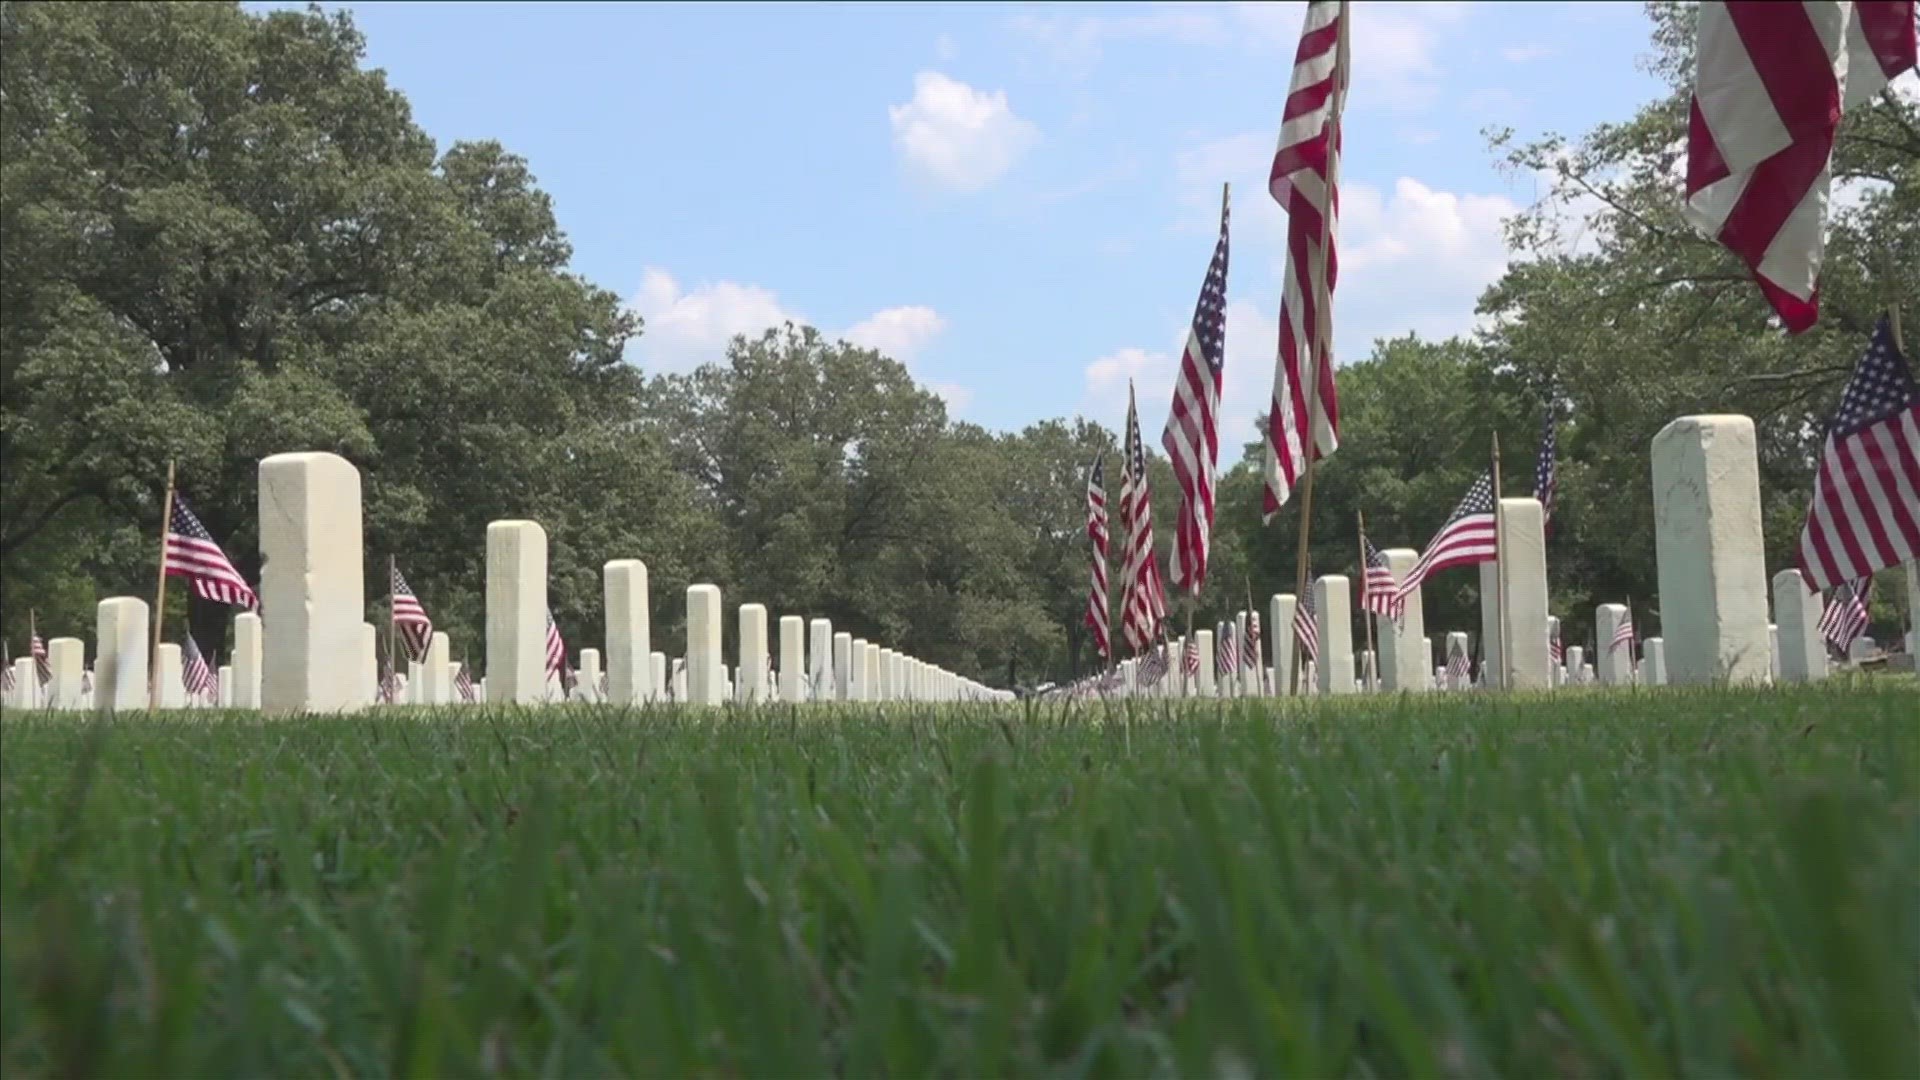 Speakers at the Memphis National Cemetery highlighted the enduring achievement and sacrifice of the nation's fallen.